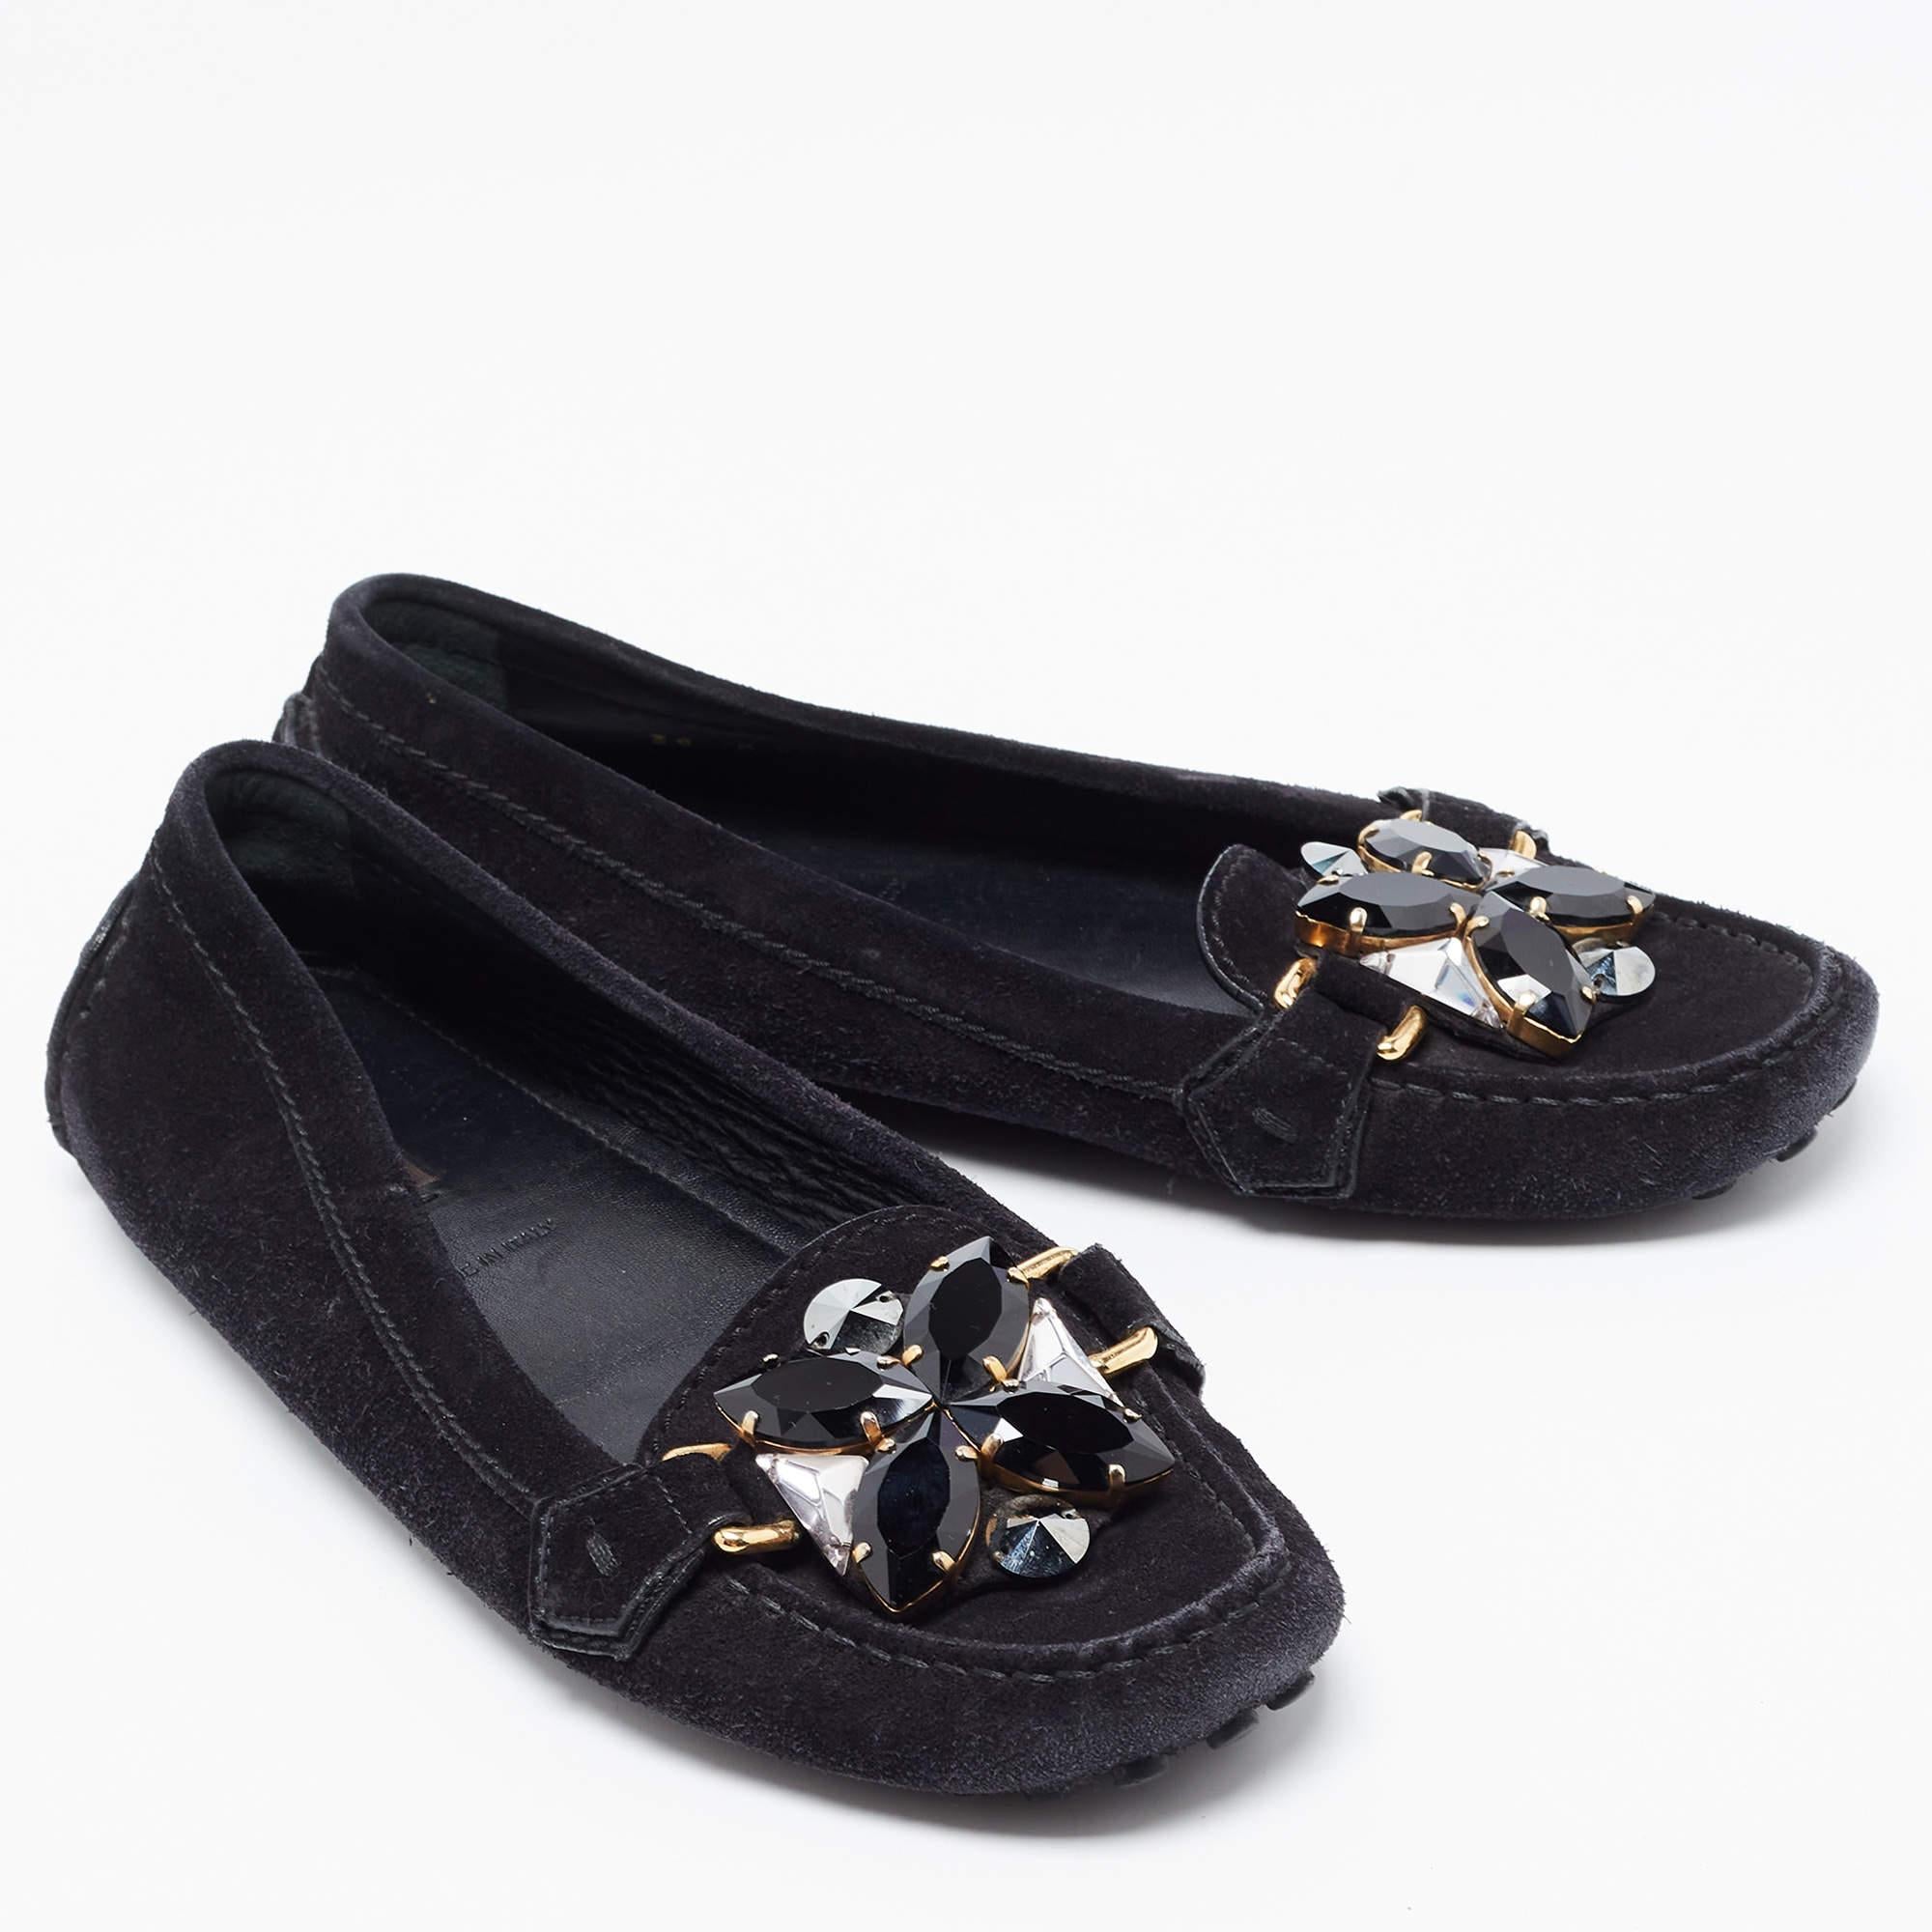 Crafted from suede and styled into an edgy shape, this pair of black loafers by Louis Vuitton is a blend of luxury and comfort. They feature gorgeous crystal embellishments on the front, leather lined insoles and rubber pebbling on the outsoles. The